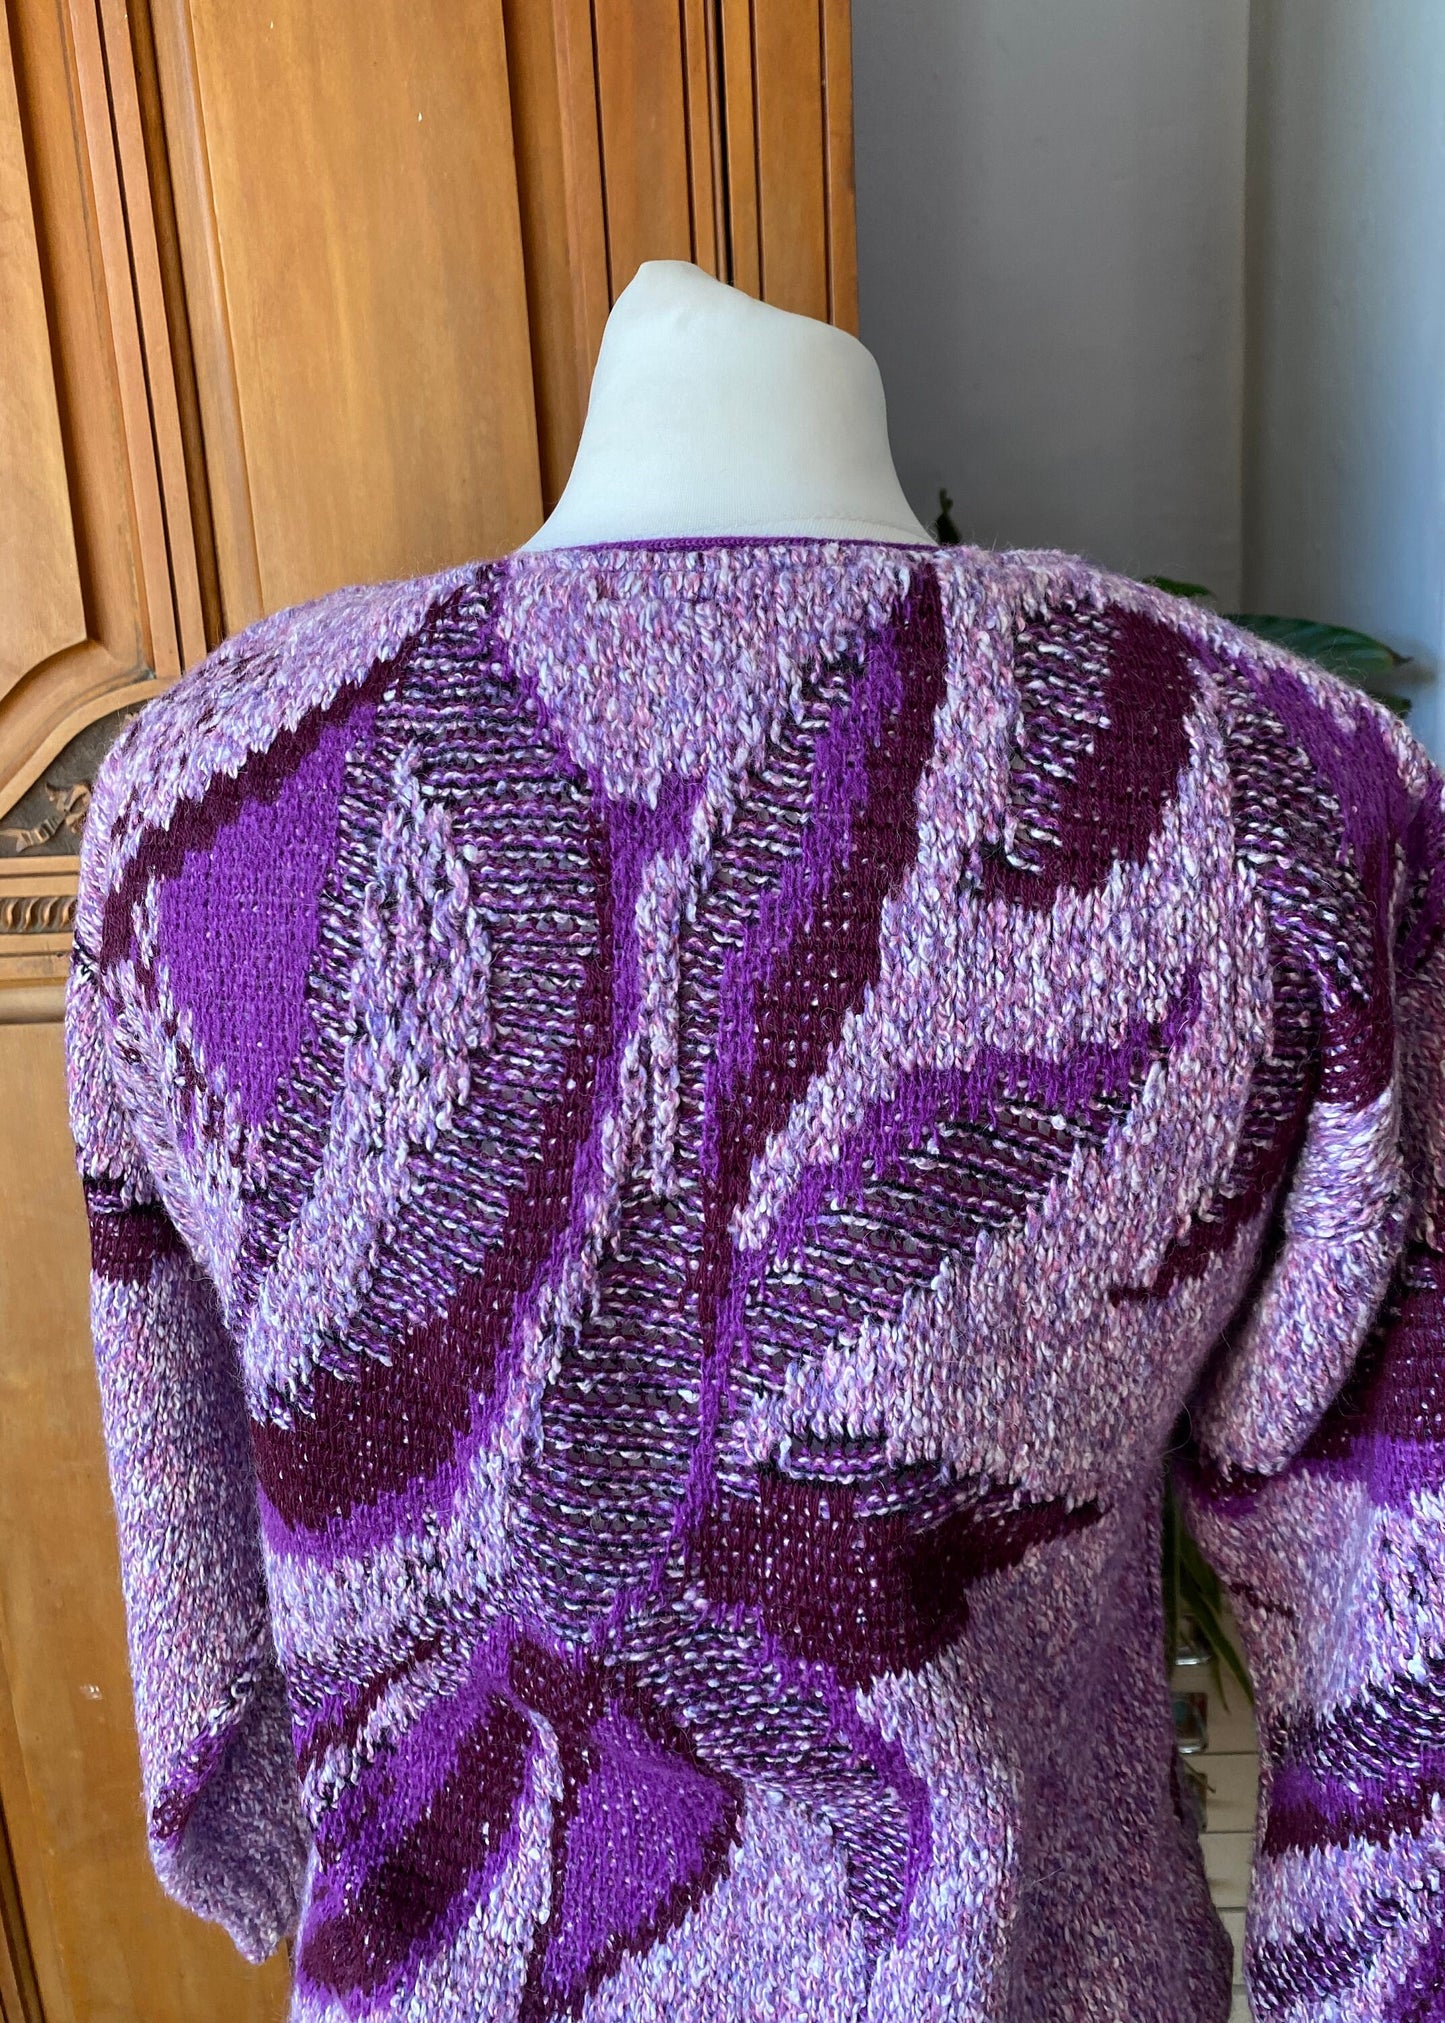 80s lilac and purple abstract print scoop neck jumper. Approx UK size 10-12